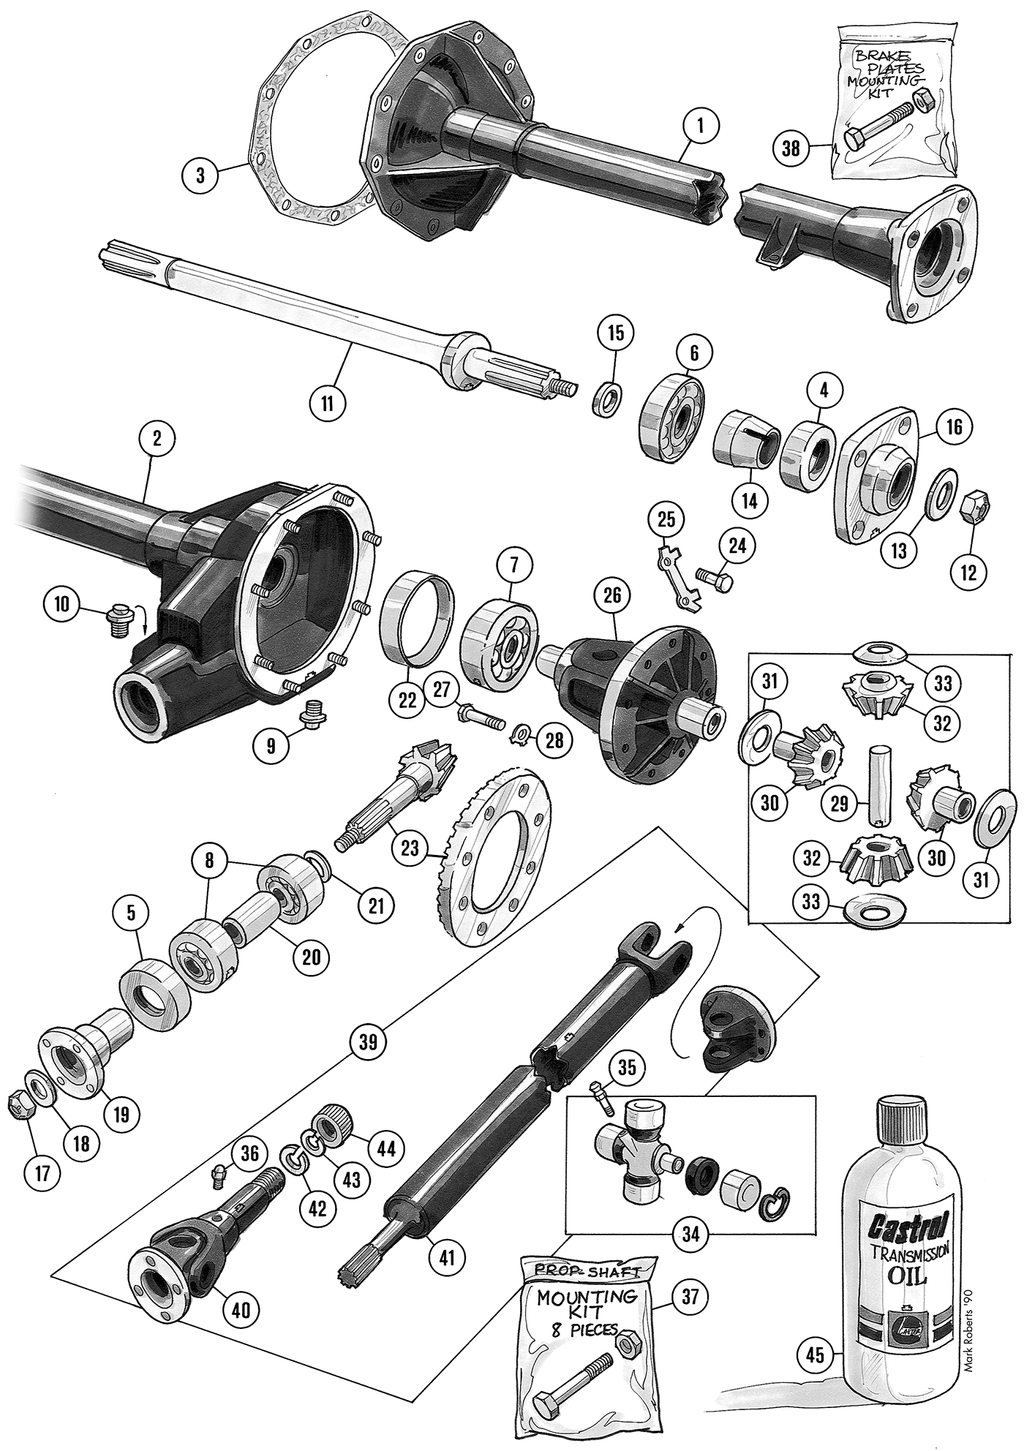 MGTD-TF 1949-1955 - Universal joint | Webshop Anglo Parts - Rear axle, propshaft - 1